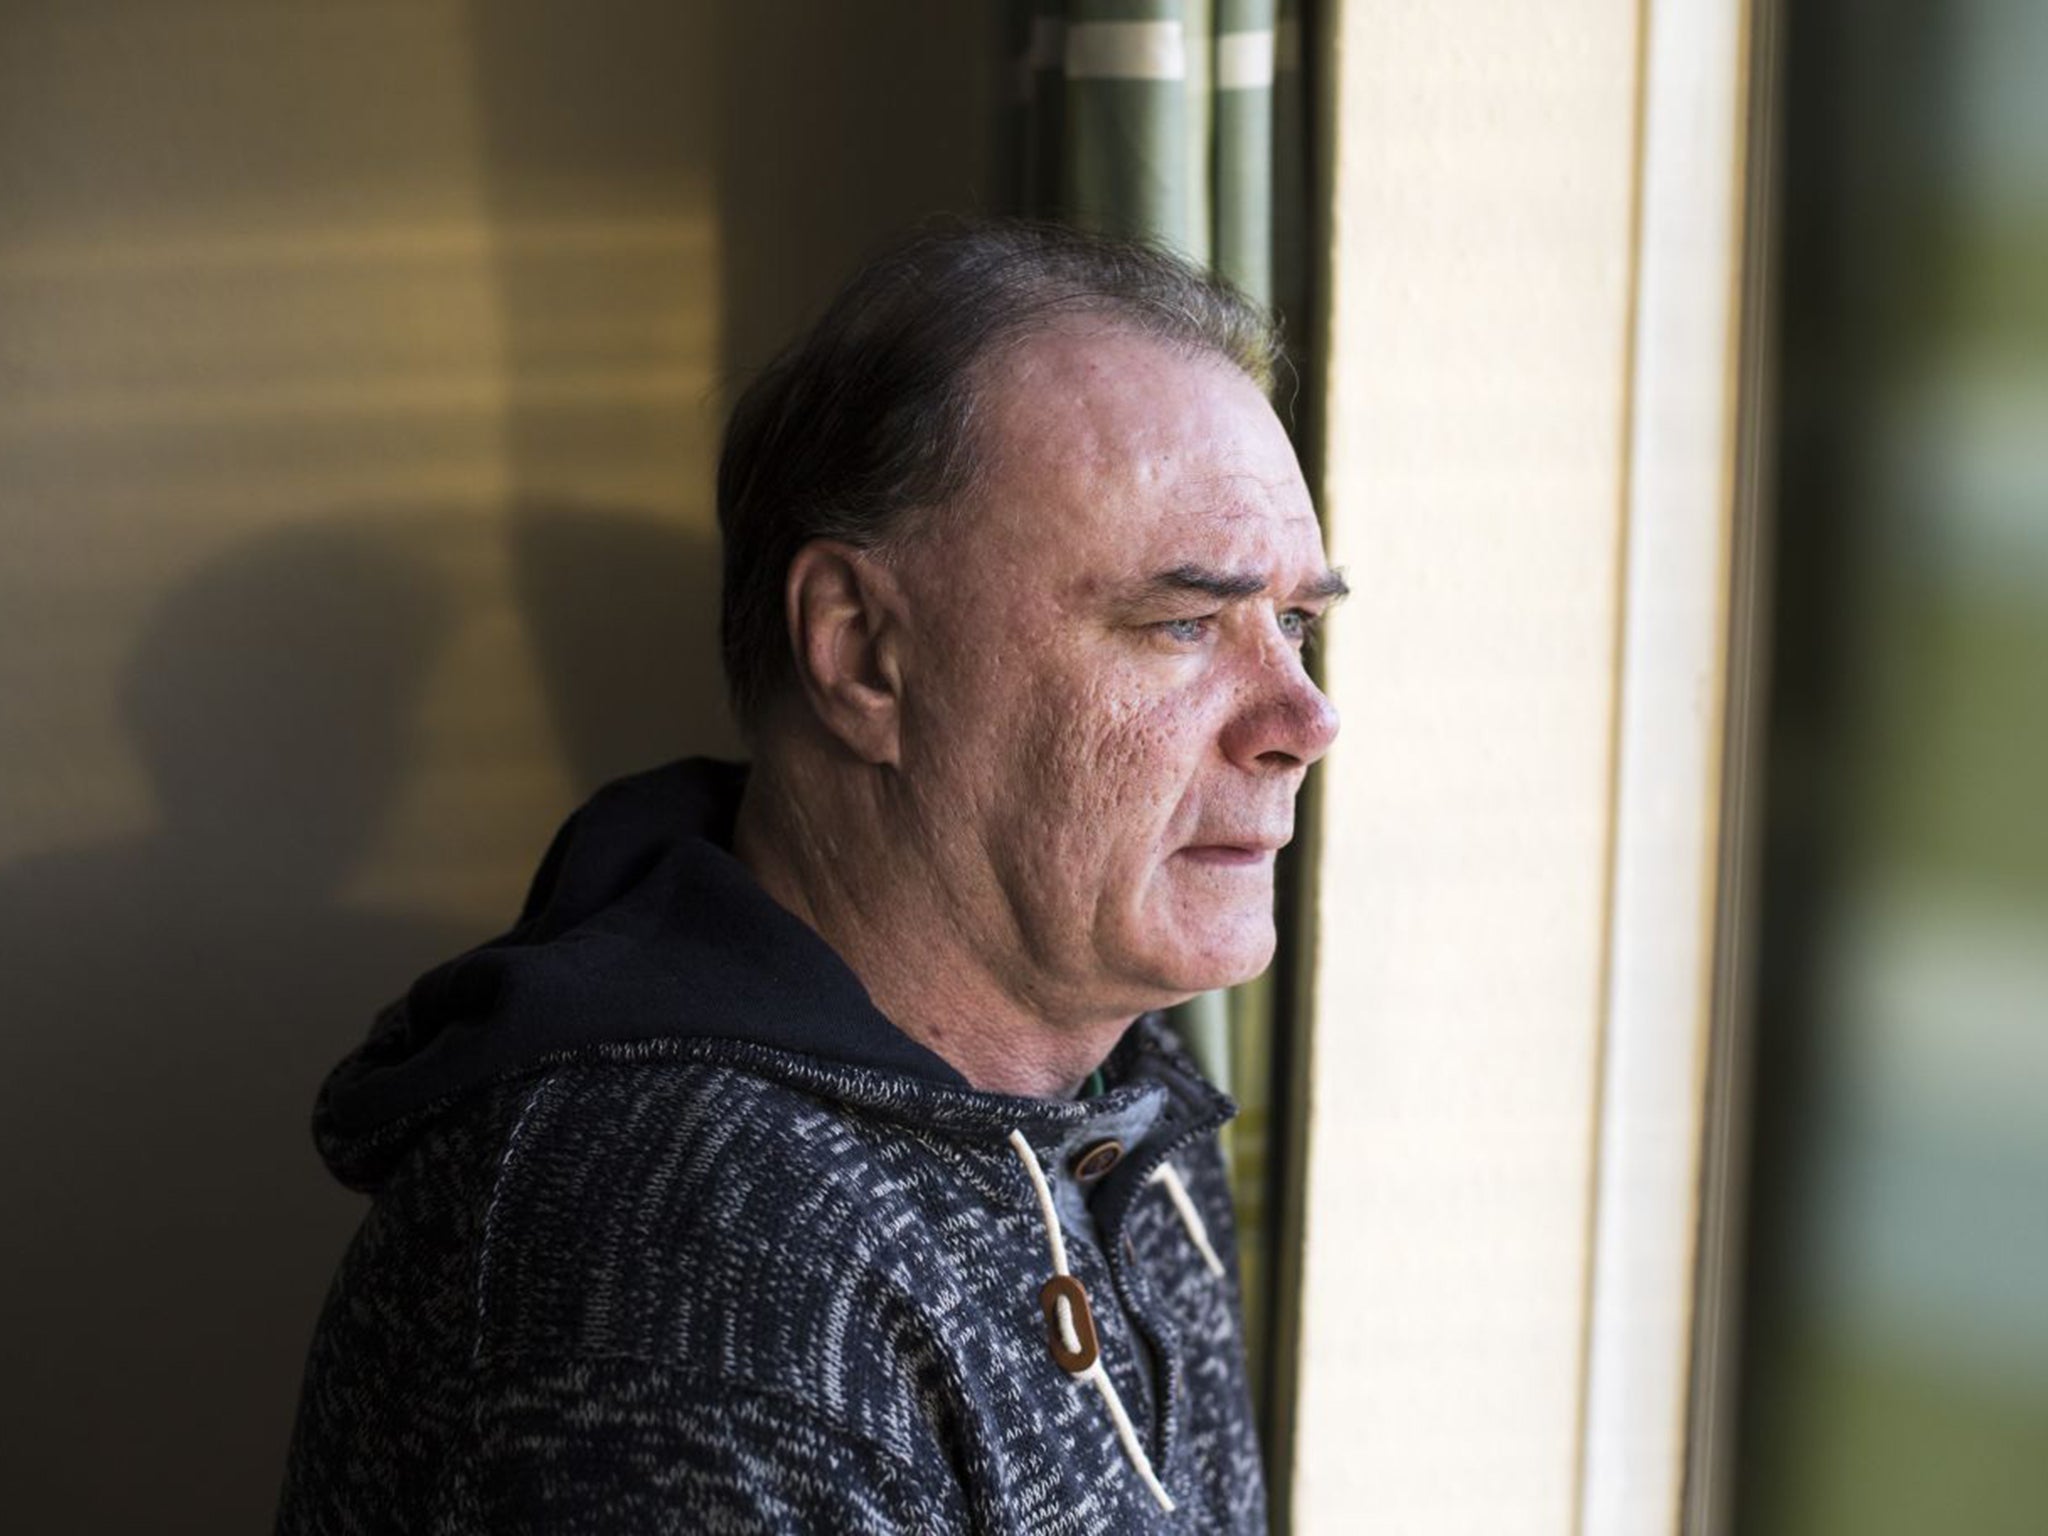 Victor Nealon spent 17 years in prison for attempted rape (Andrew Fox)